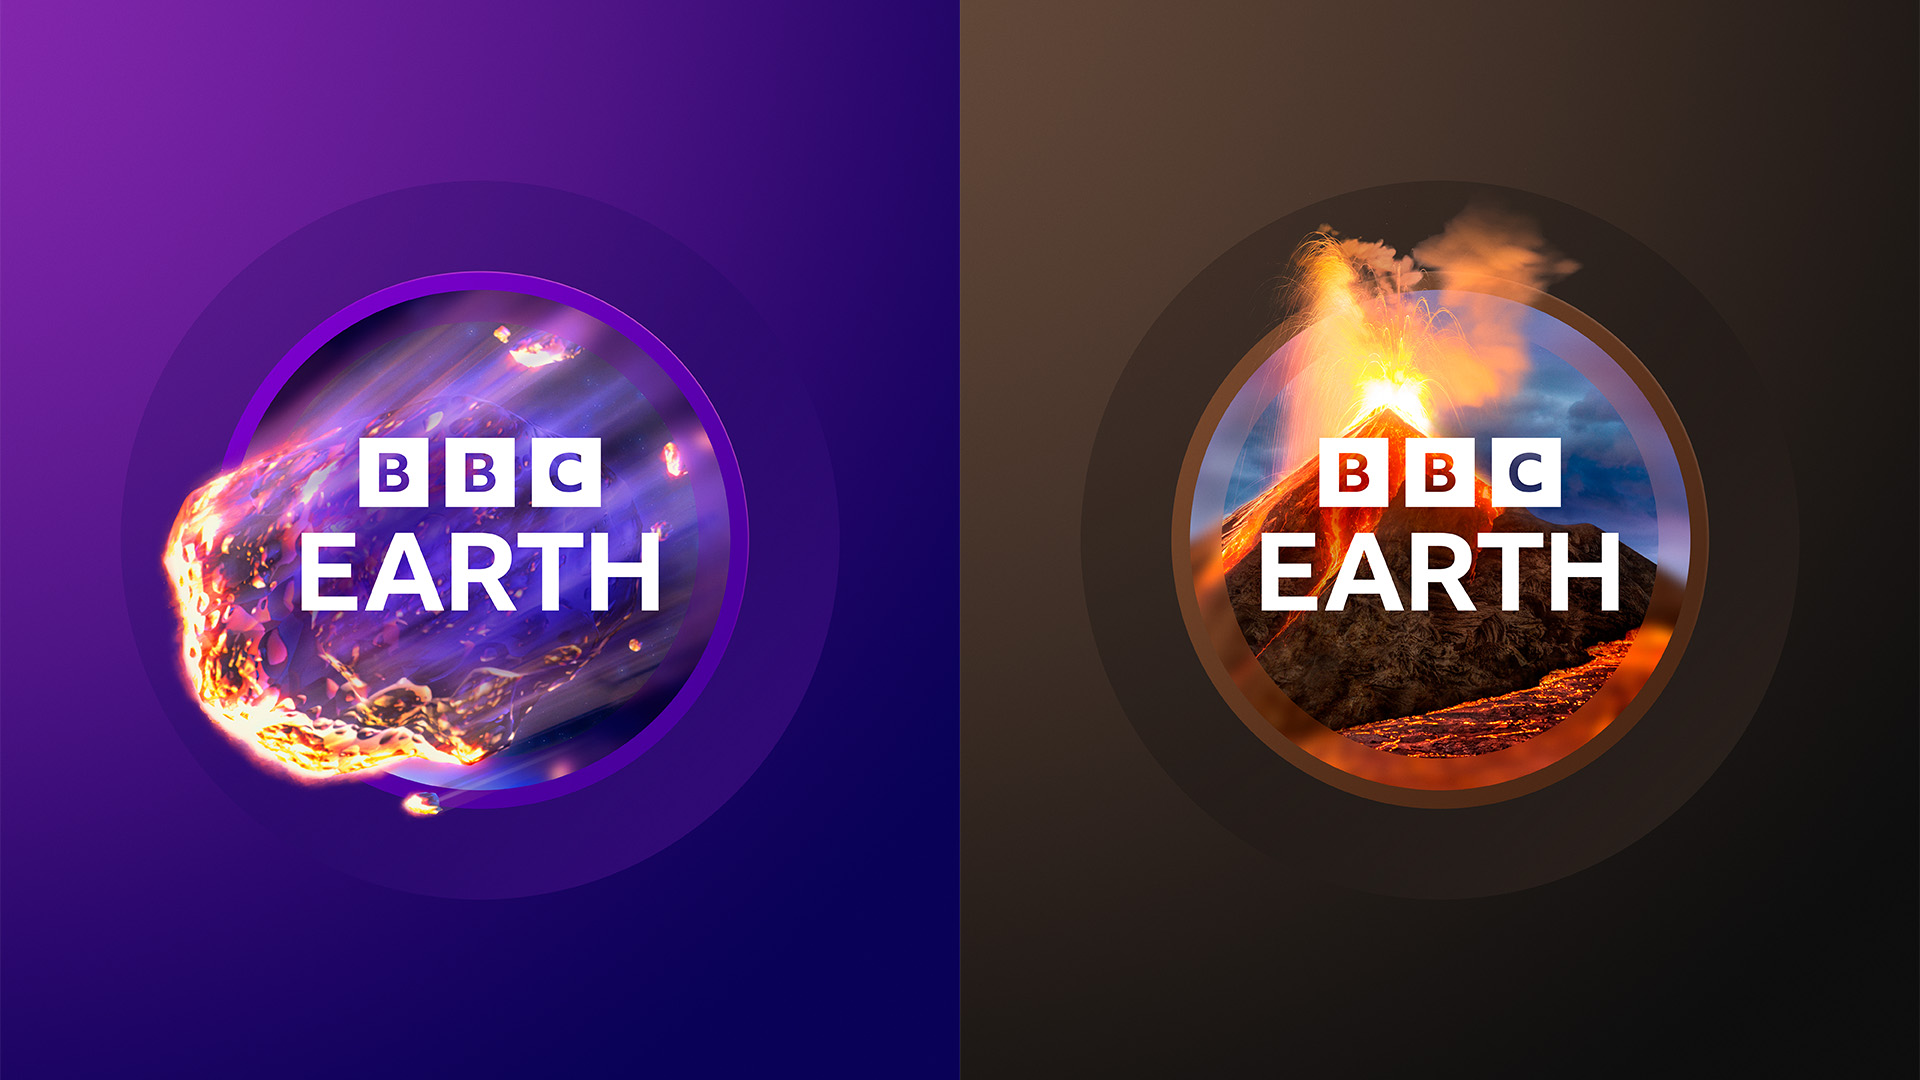 BBC Earth logos featuring a meteor and an erupting volcano